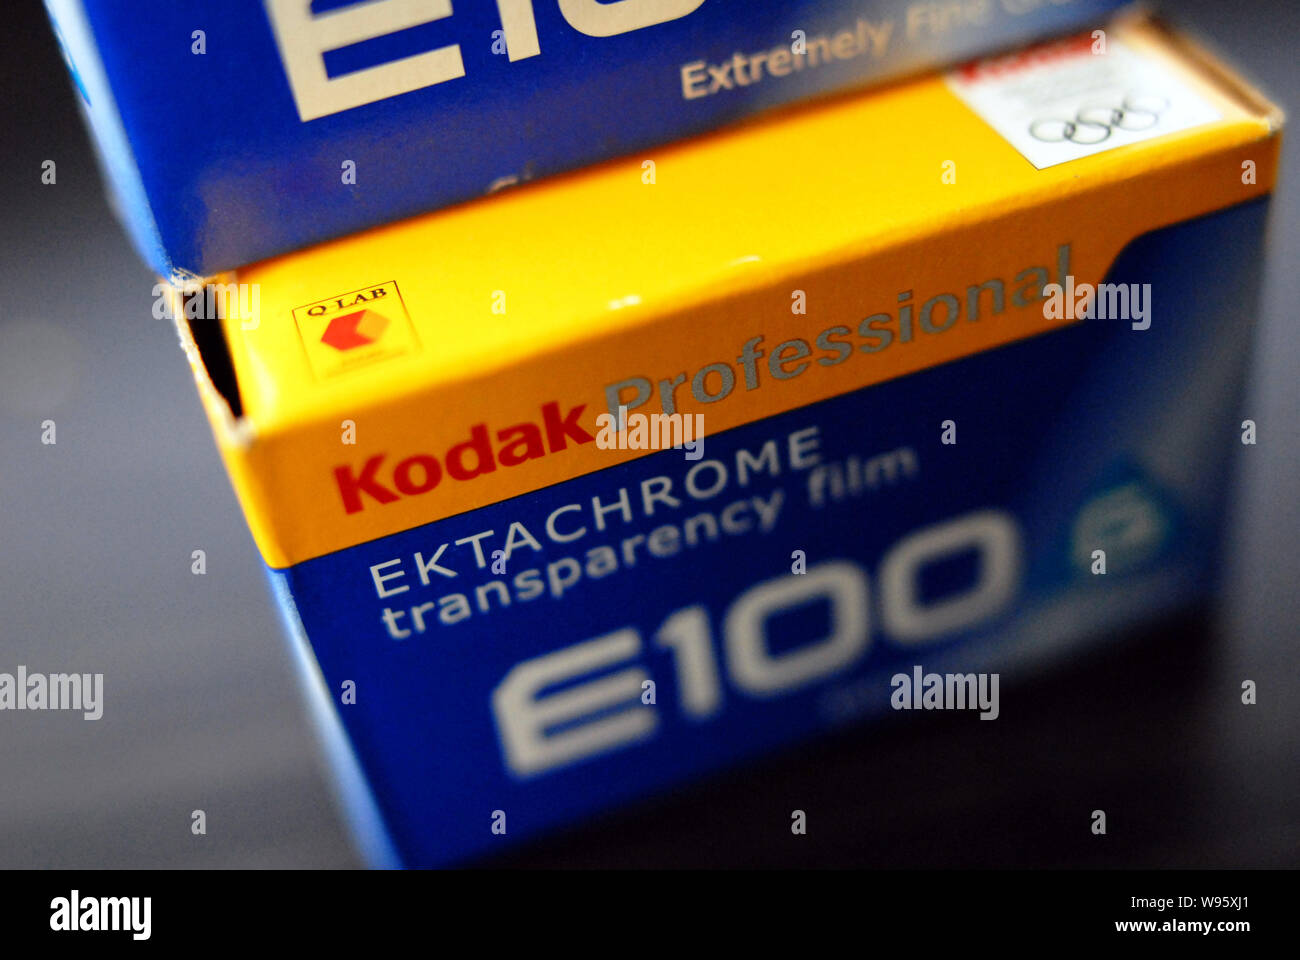 Boxes of Kodak films are pictured in Beijing, China, 19 January 2012.   Eastman Kodak Co filed for bankruptcy protection on Thursday (19 January 2012) Stock Photo